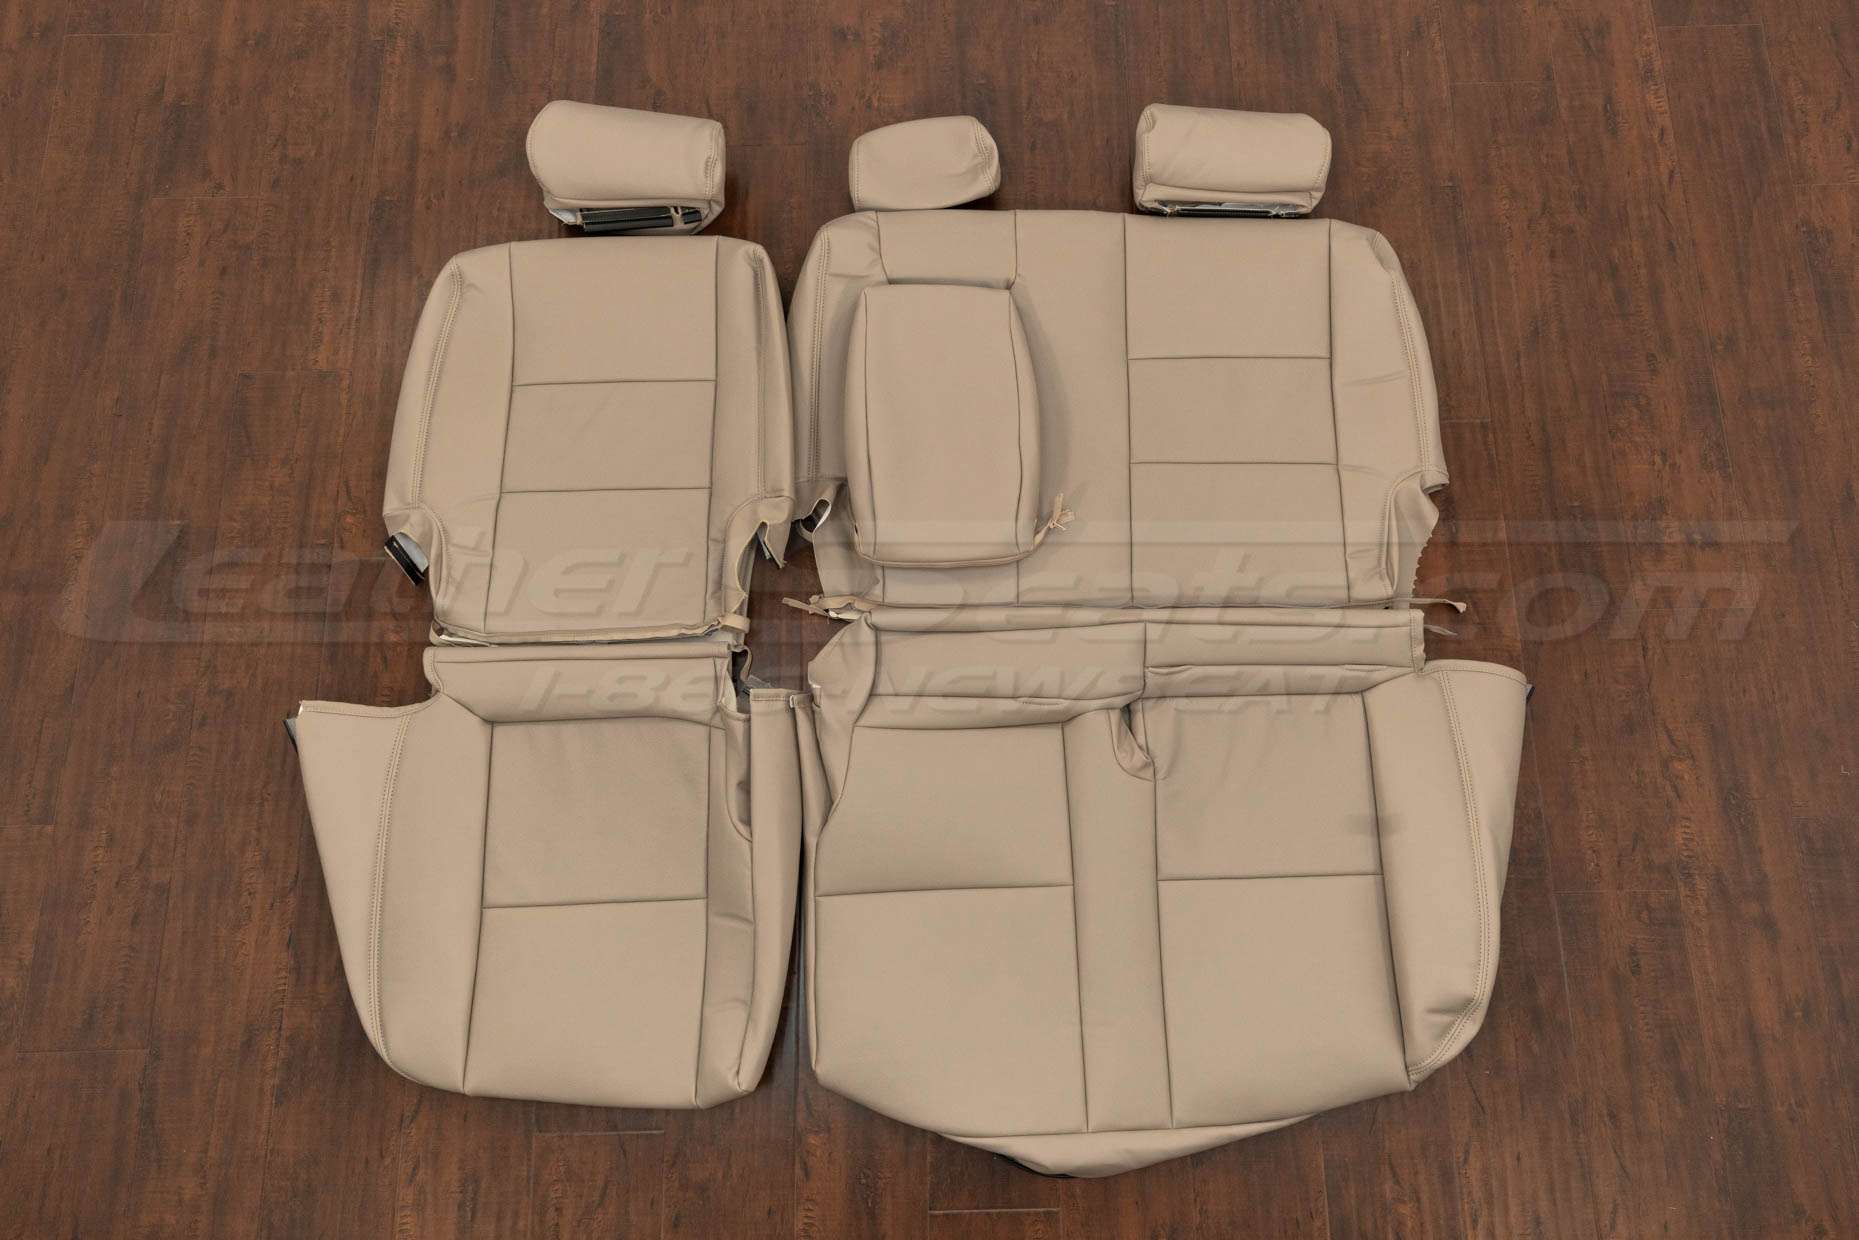 2001-2004 Toyota Sequoia Leather Seat Kit - Adobe - Middle row upholstery w/ armrest